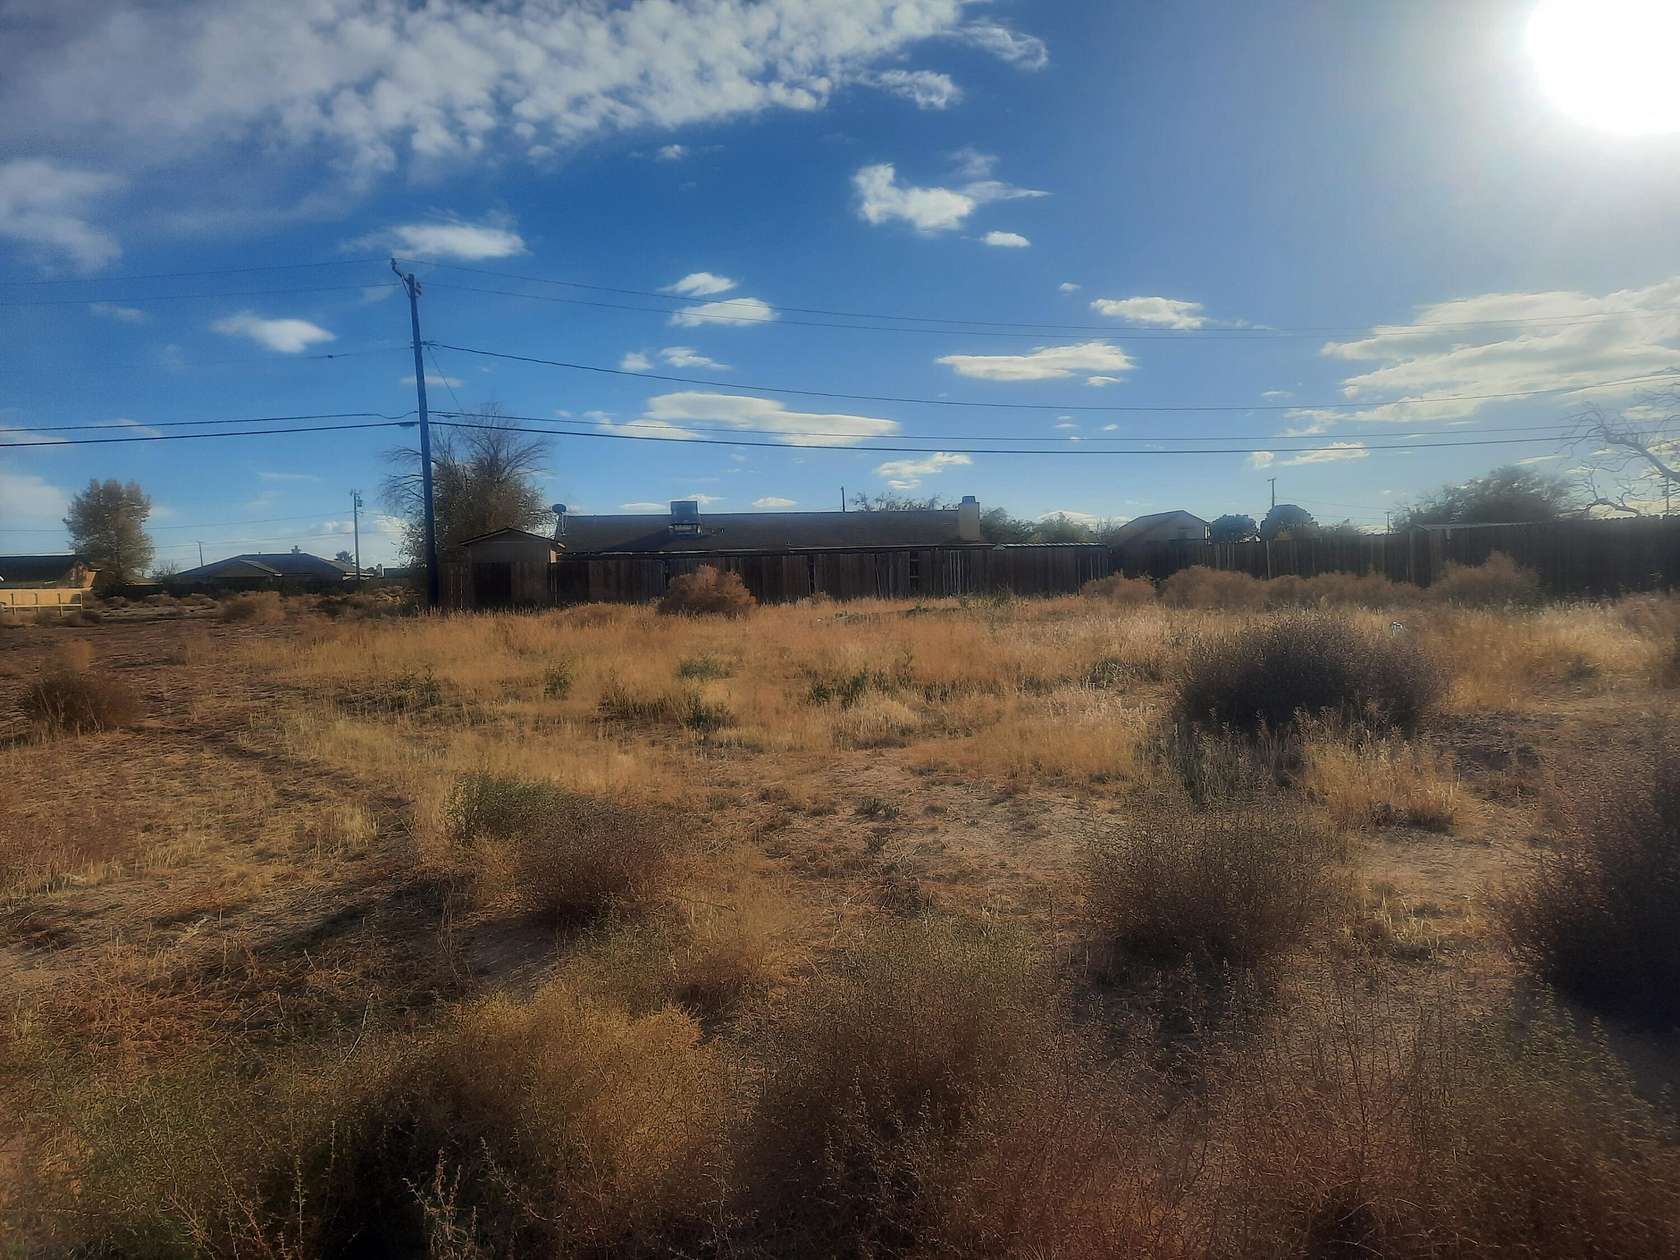 Commercial Land for Sale in California City, California